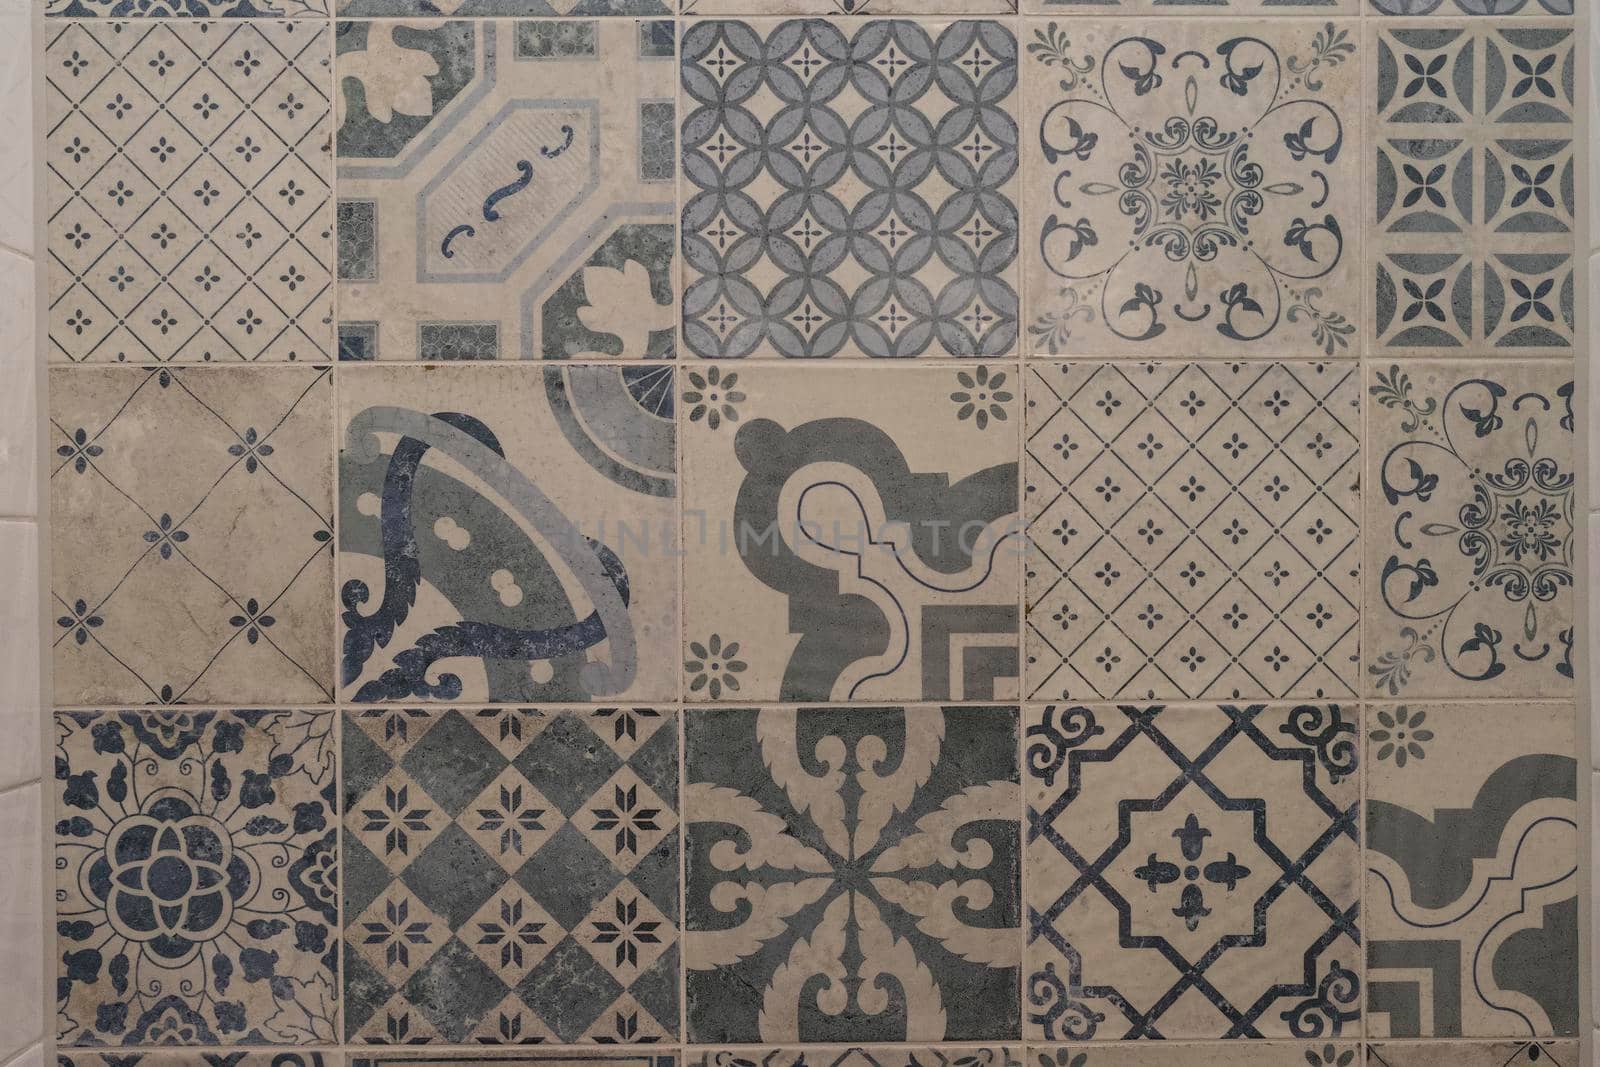 Decorative blue and cream tiles with different patterns on a wall by LeoniekvanderVliet